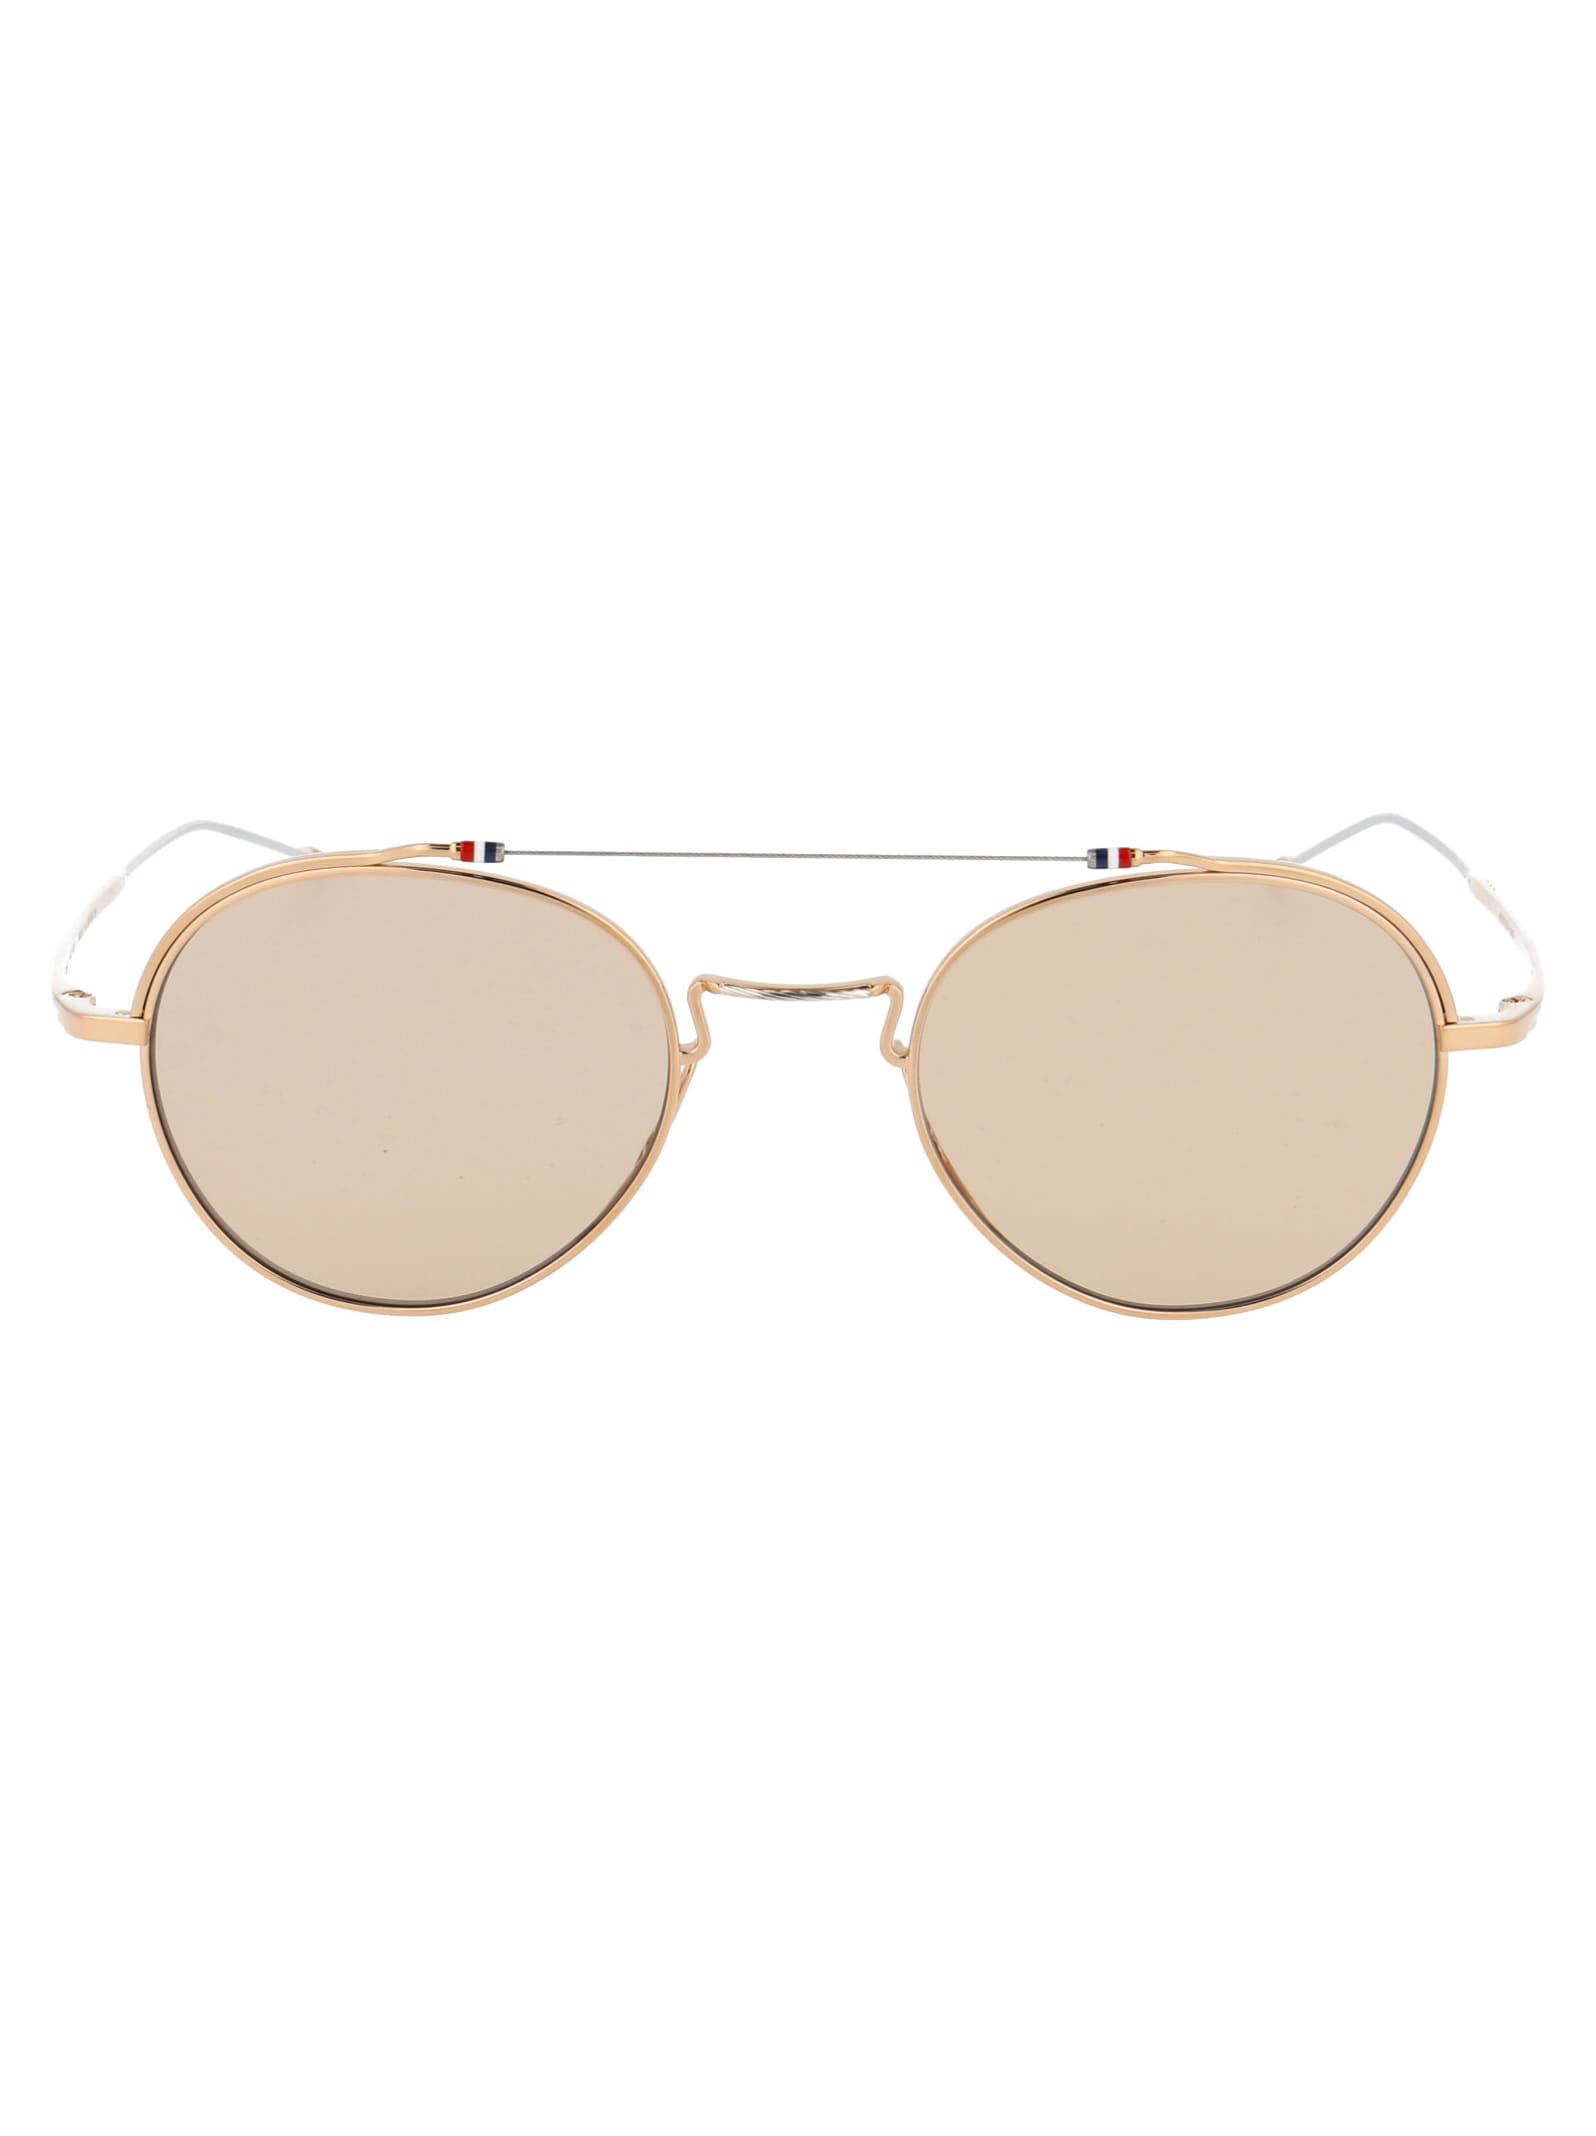 Thom Browne Tb-912 Sunglasses In White Gold - Silver W/ Light Brown - Ar